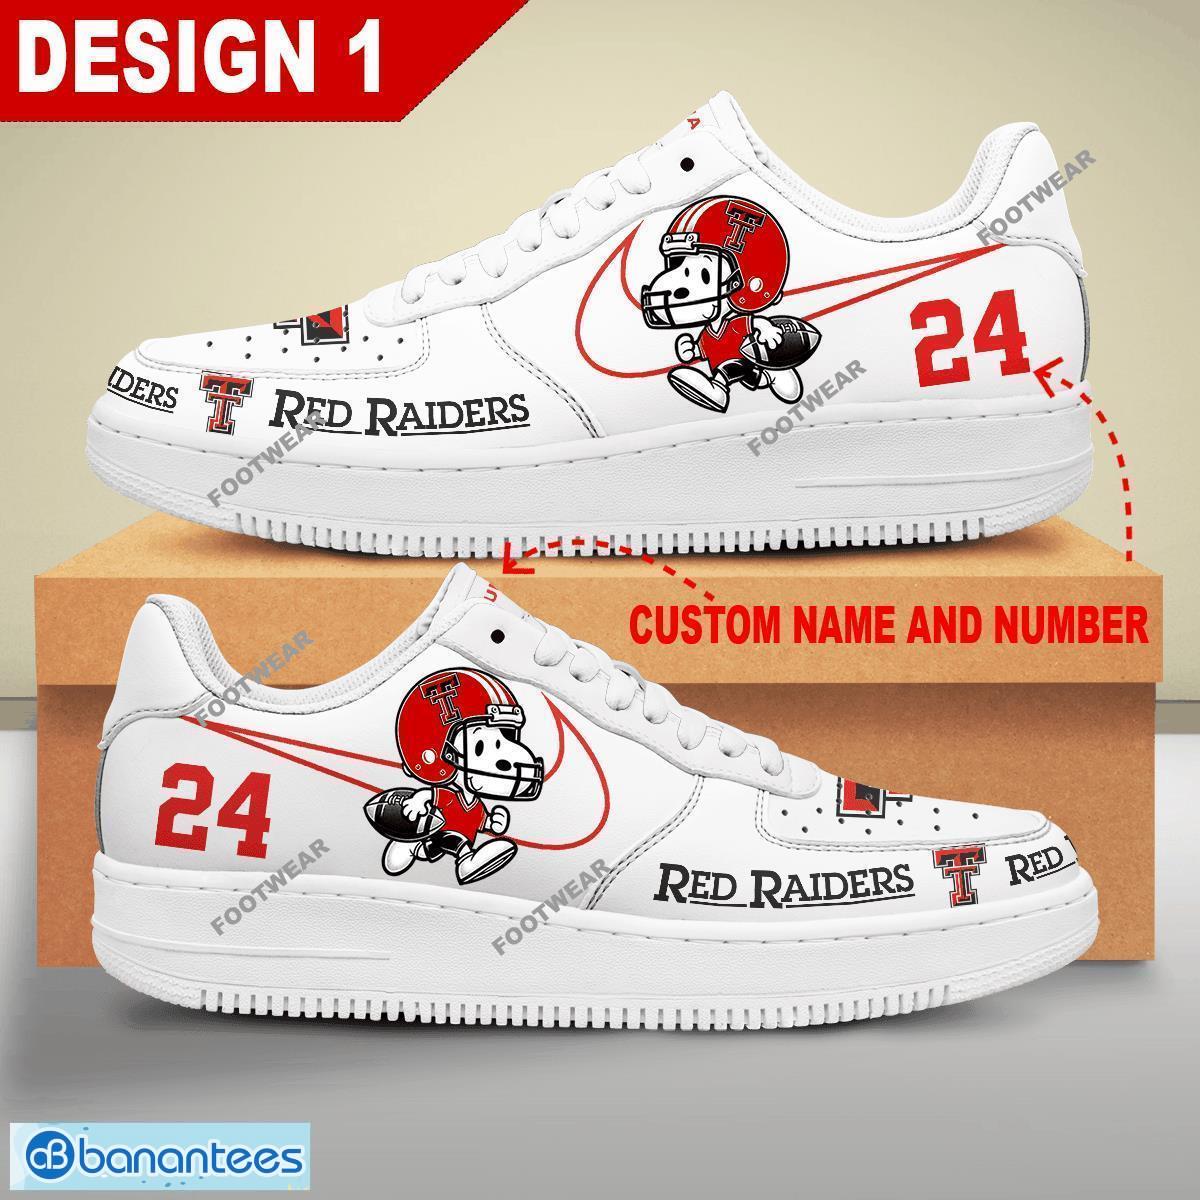 Custom Number And Name NCAA Texas Tech Red Raiders Snoopy Play Funny Football Air Force 1 Shoes Multiple Design - NCAA Texas Tech Red Raiders Snoopy Play Football Personalized Air Force 1 Shoes Design 1